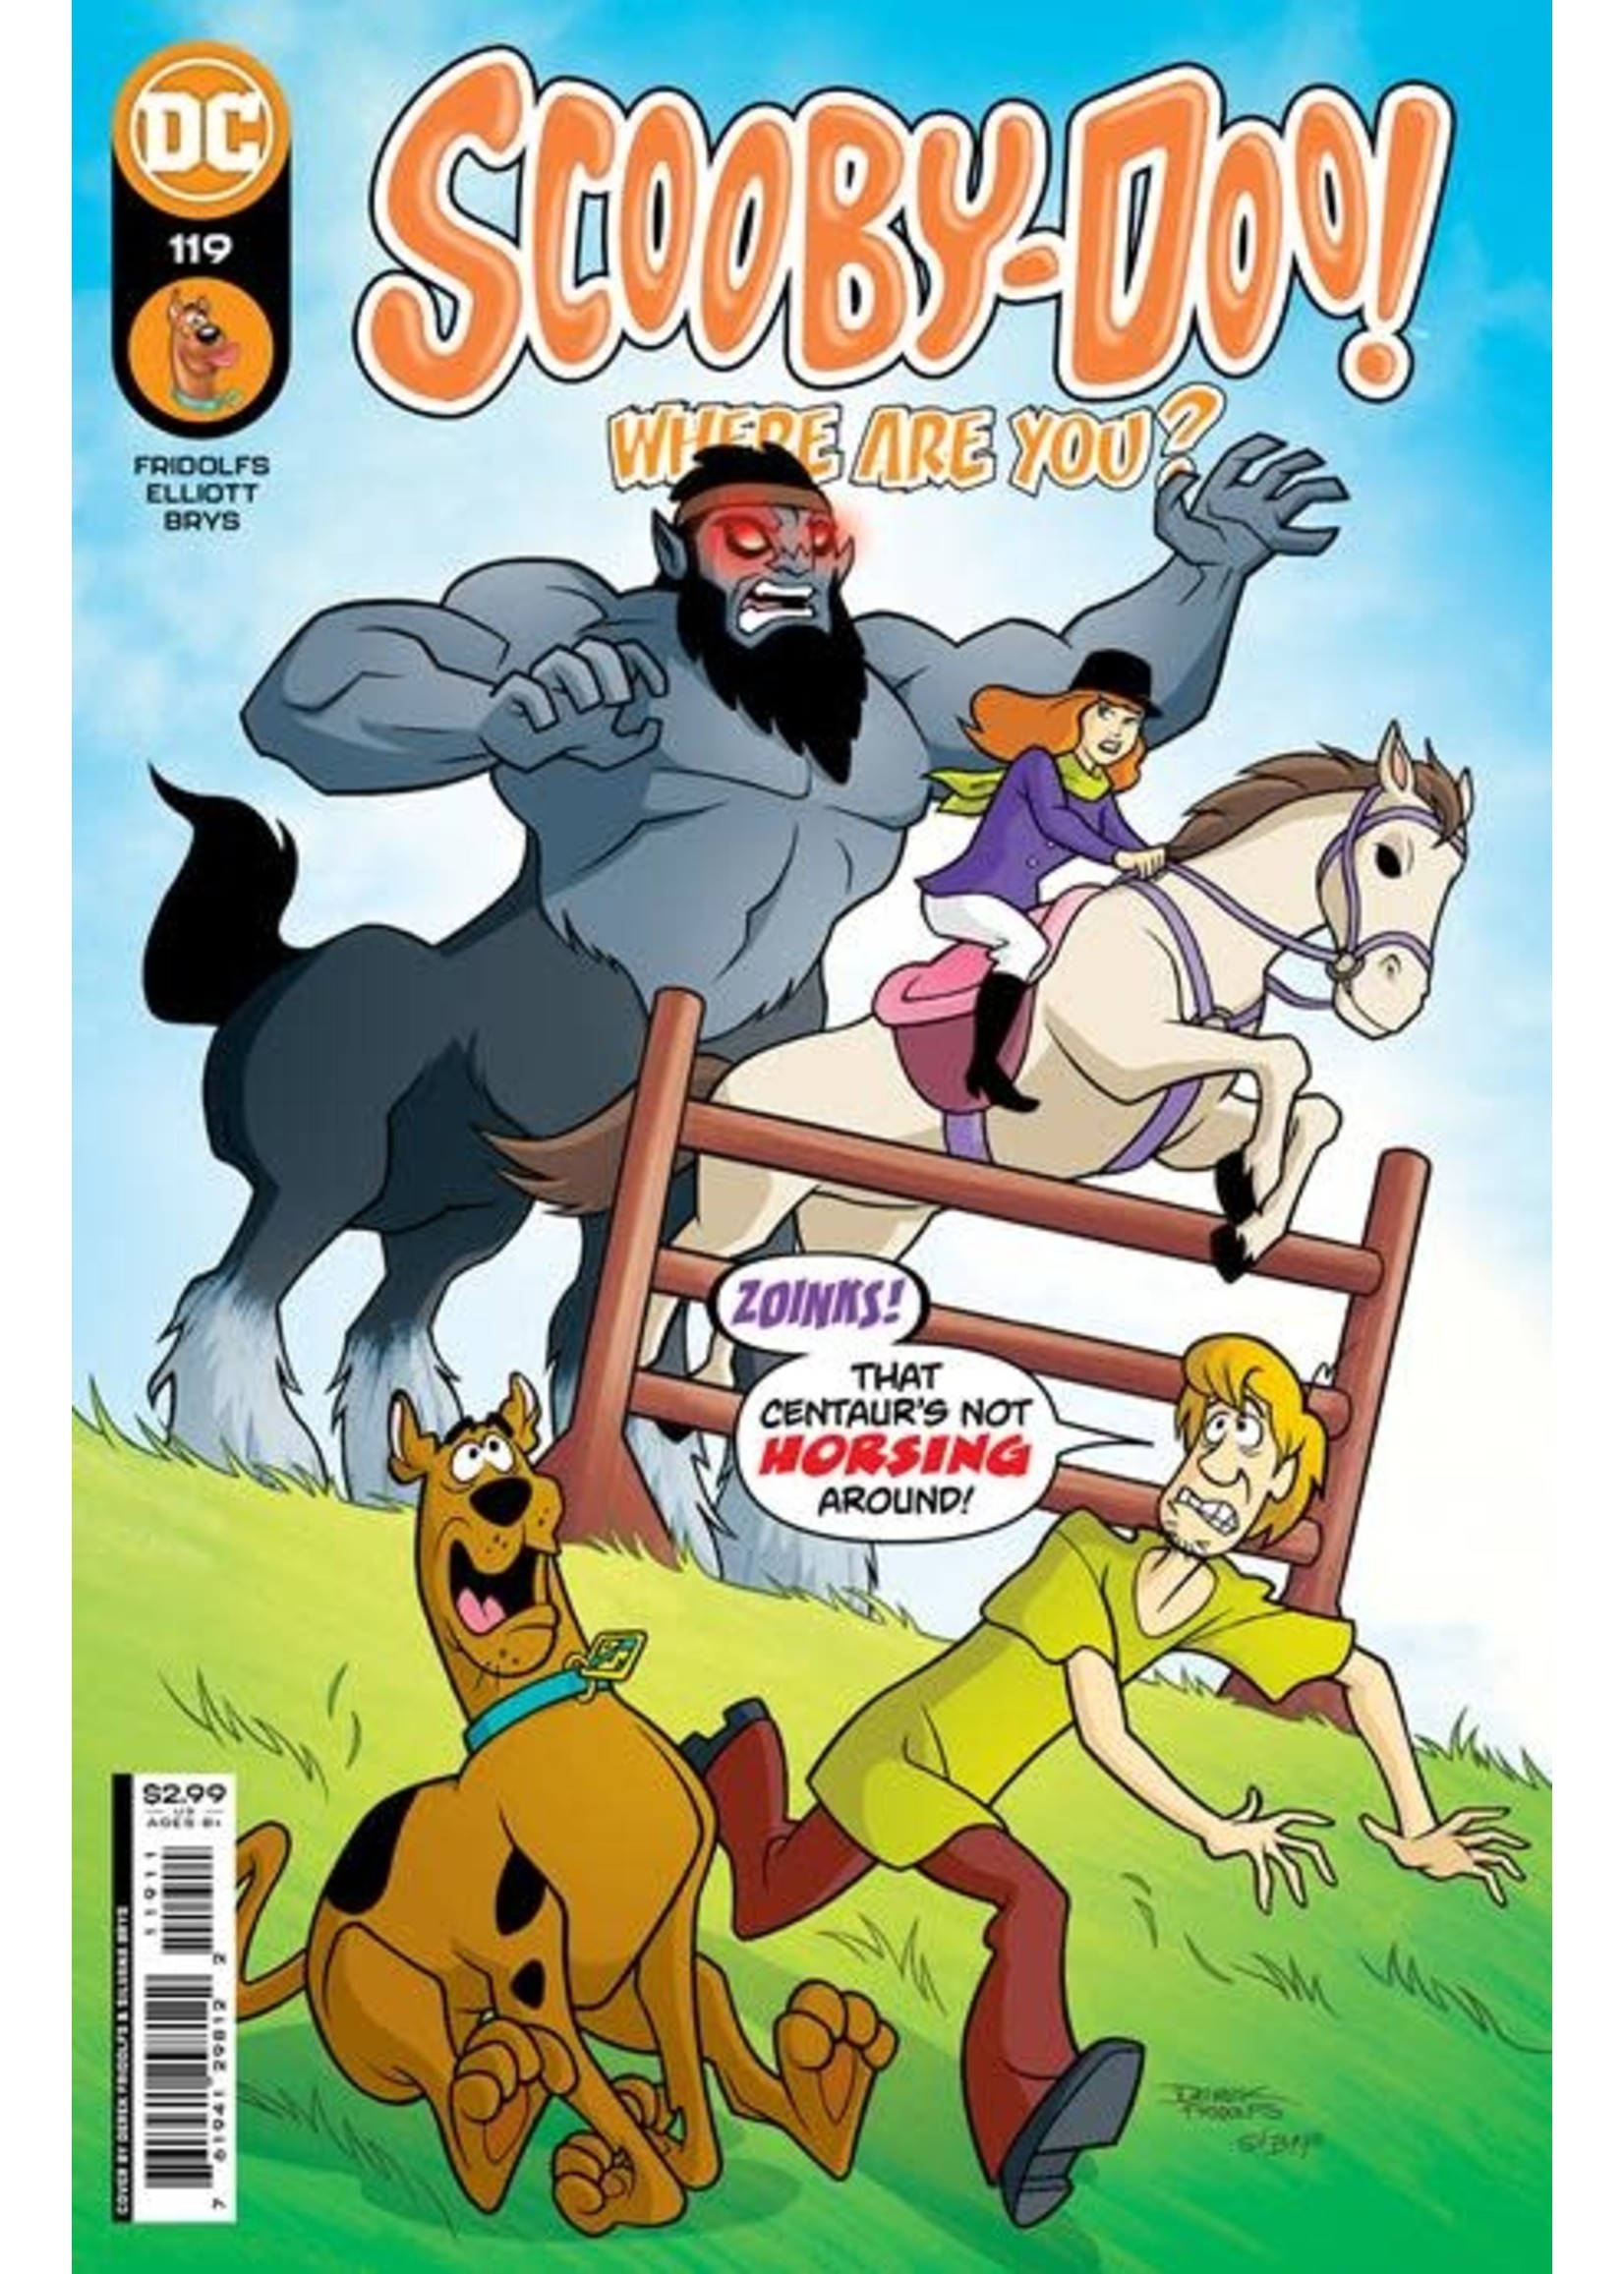 DC COMICS SCOOBY-DOO WHERE ARE YOU #119